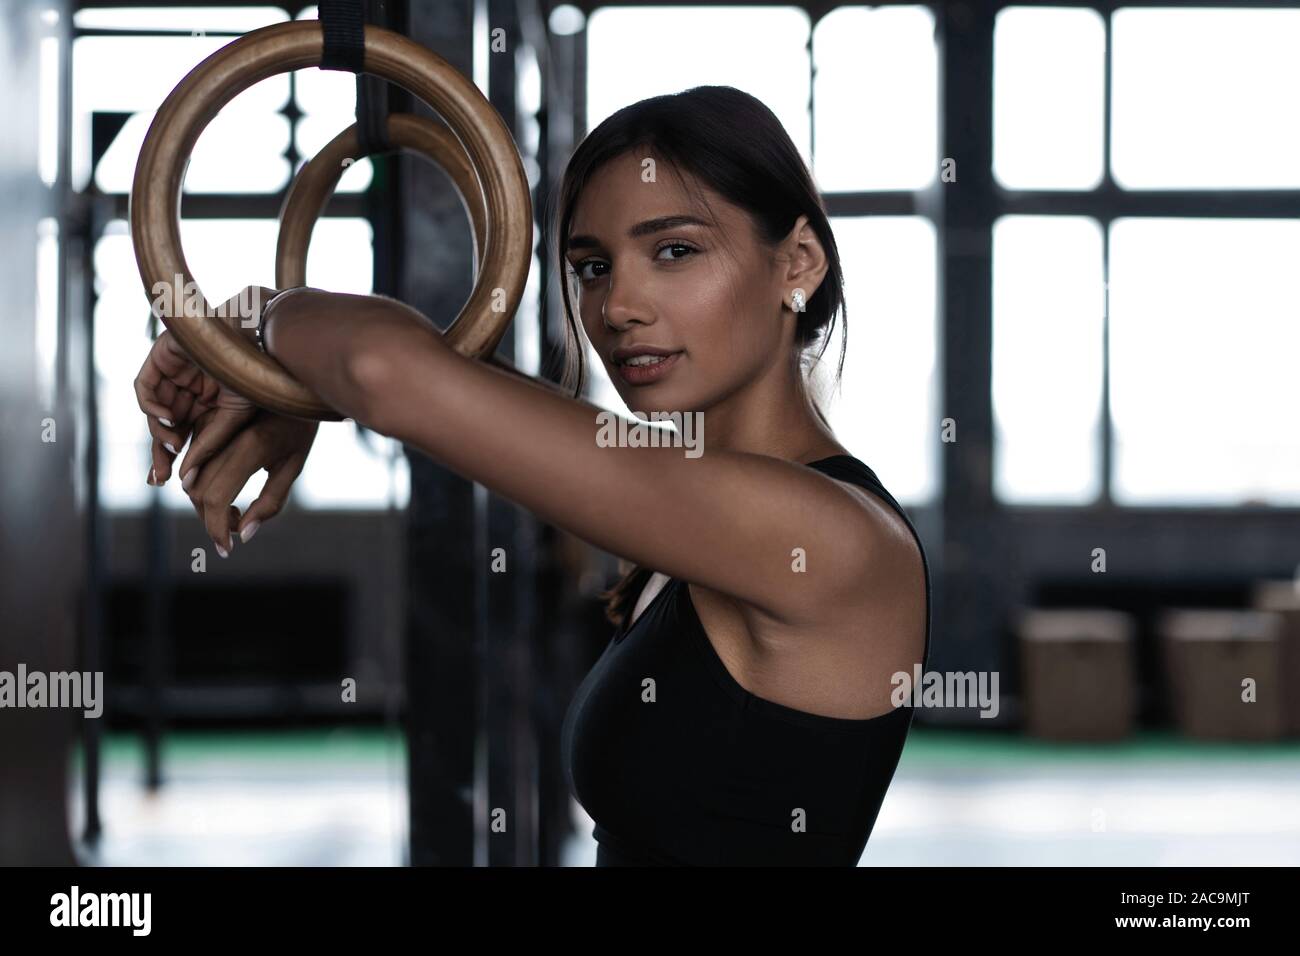 Exercising woman holding gymnast rings. Female taking rest after intense  dip ring workout at gym Stock Photo - Alamy